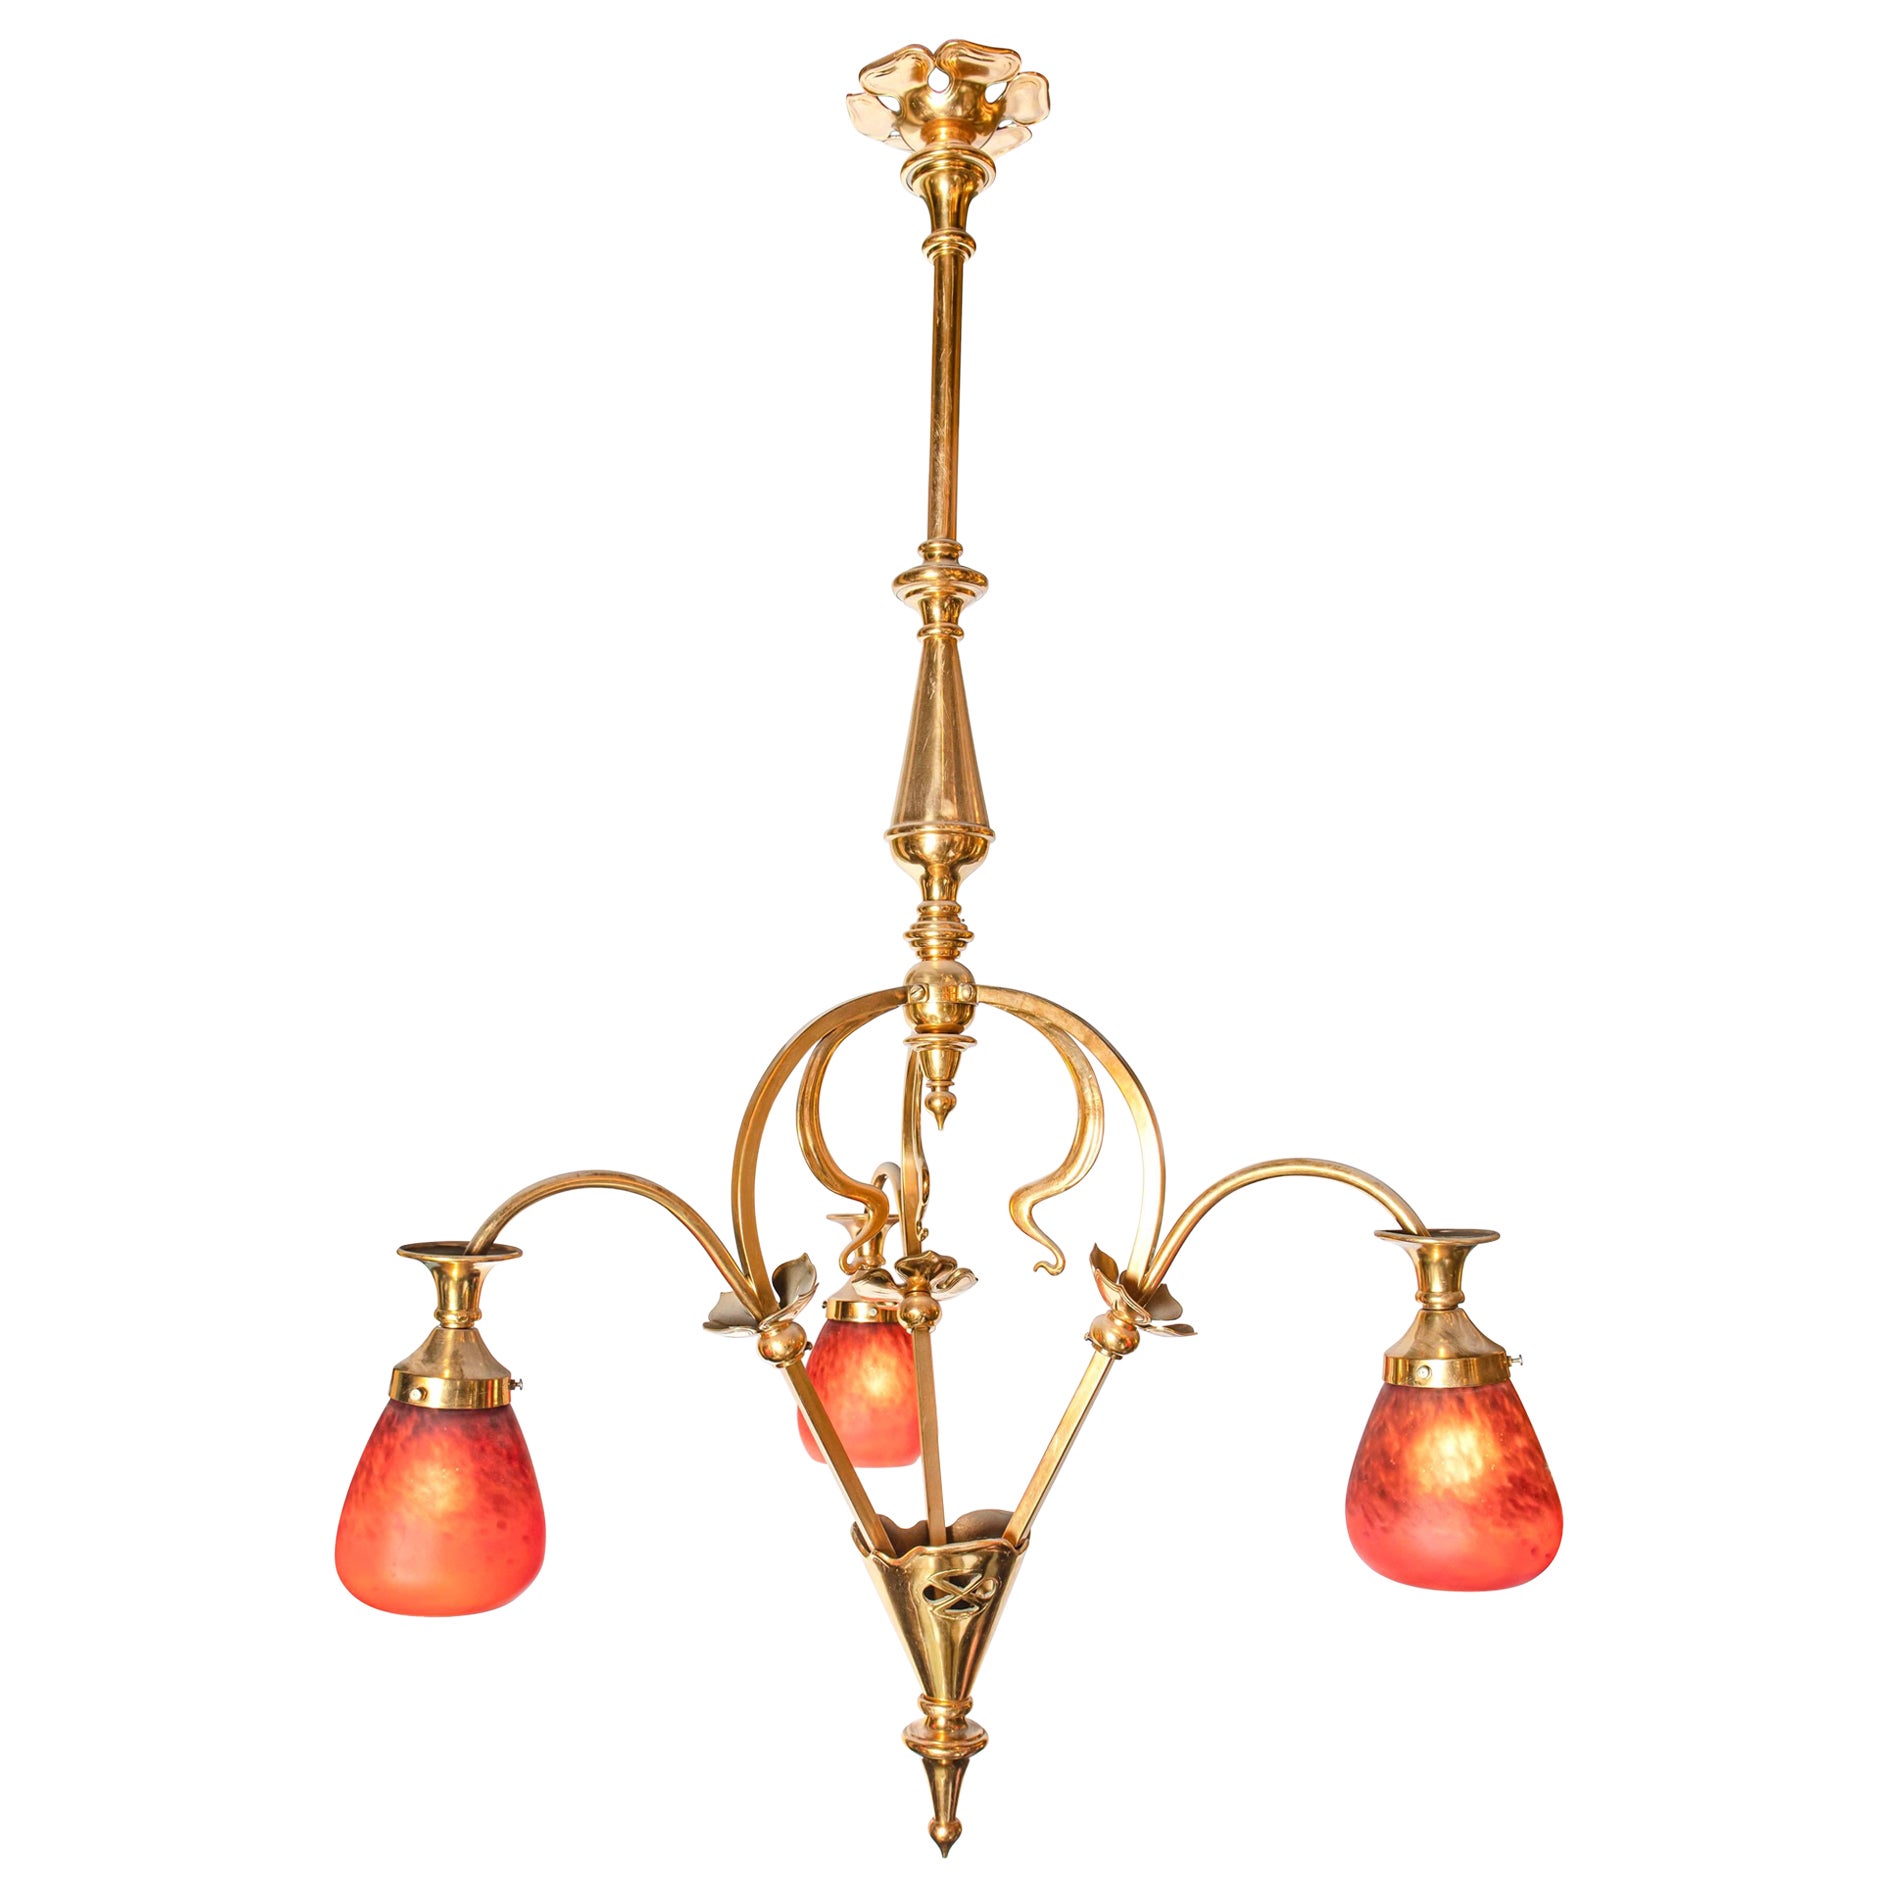 Bronze and Artistic Glass Chandelier, France, Early 20th Century